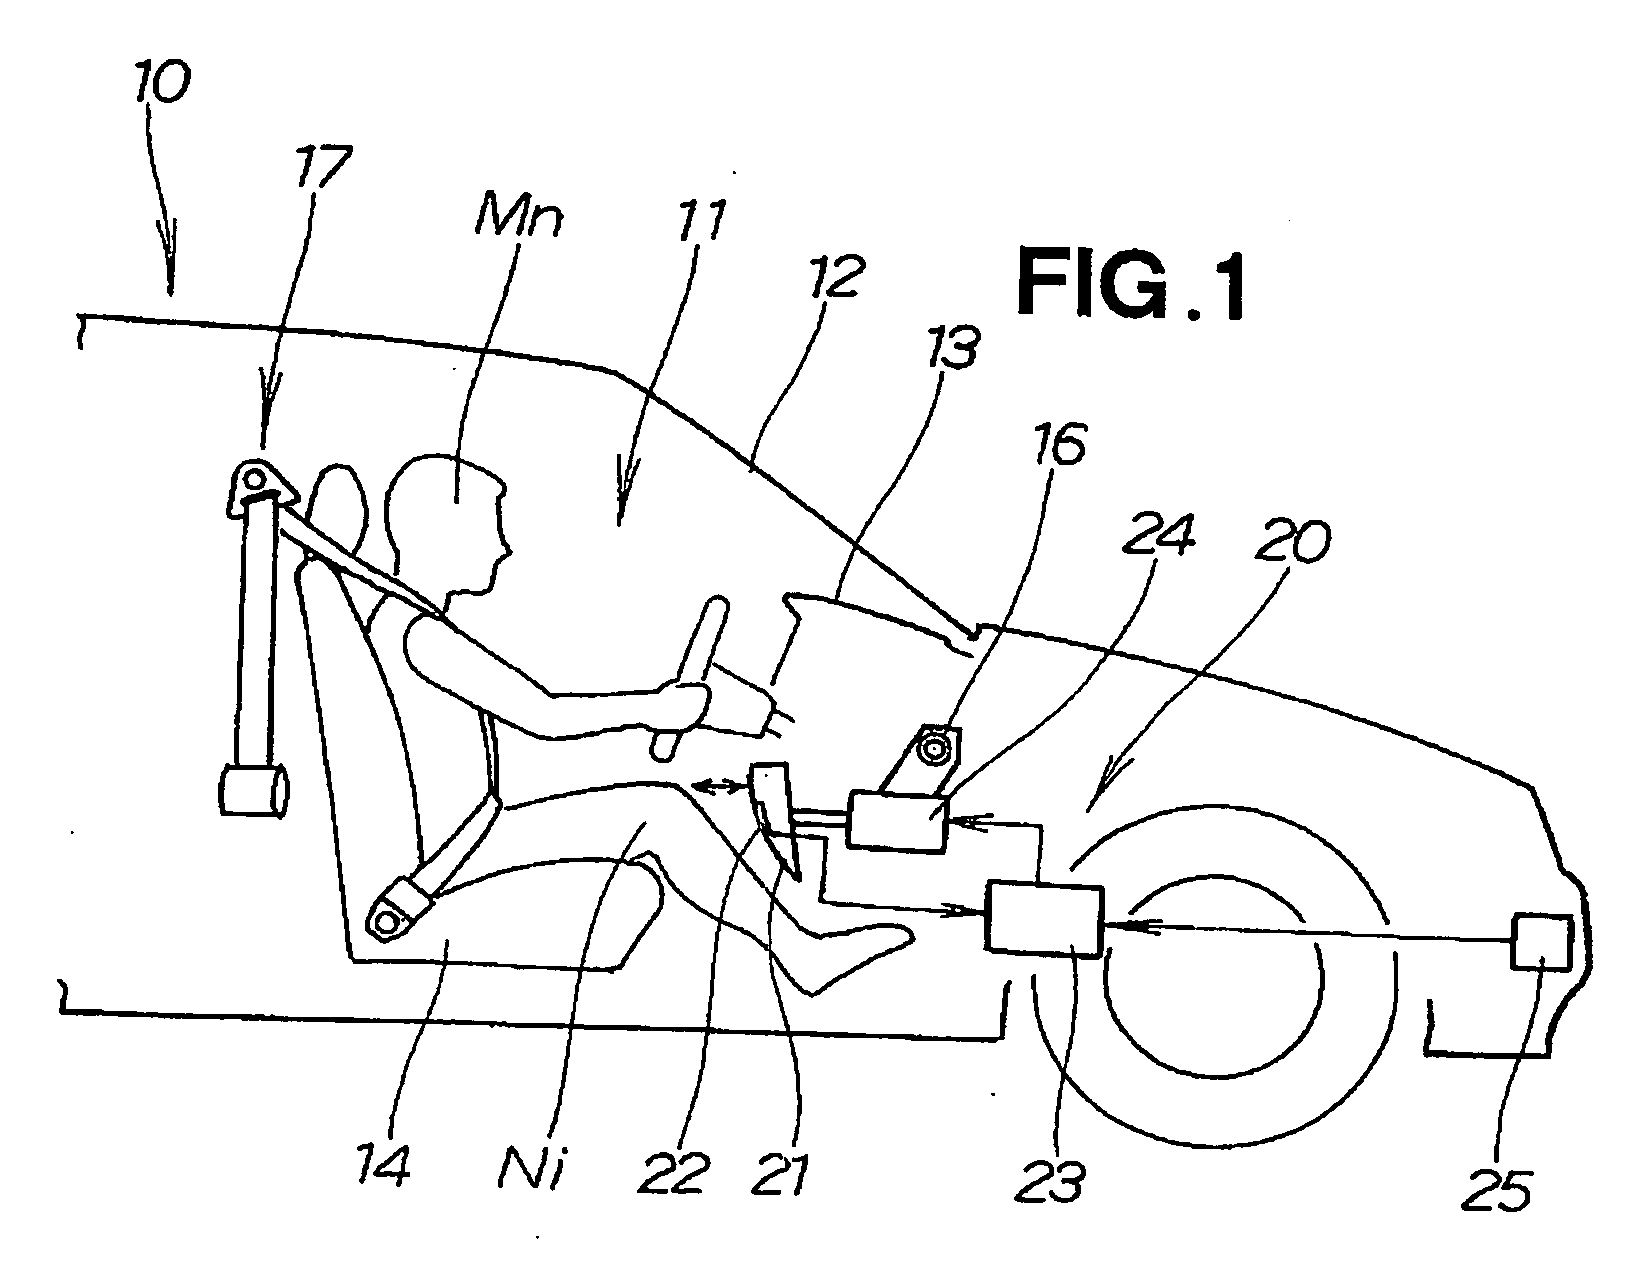 Vehicle occupant knee protection apparatus